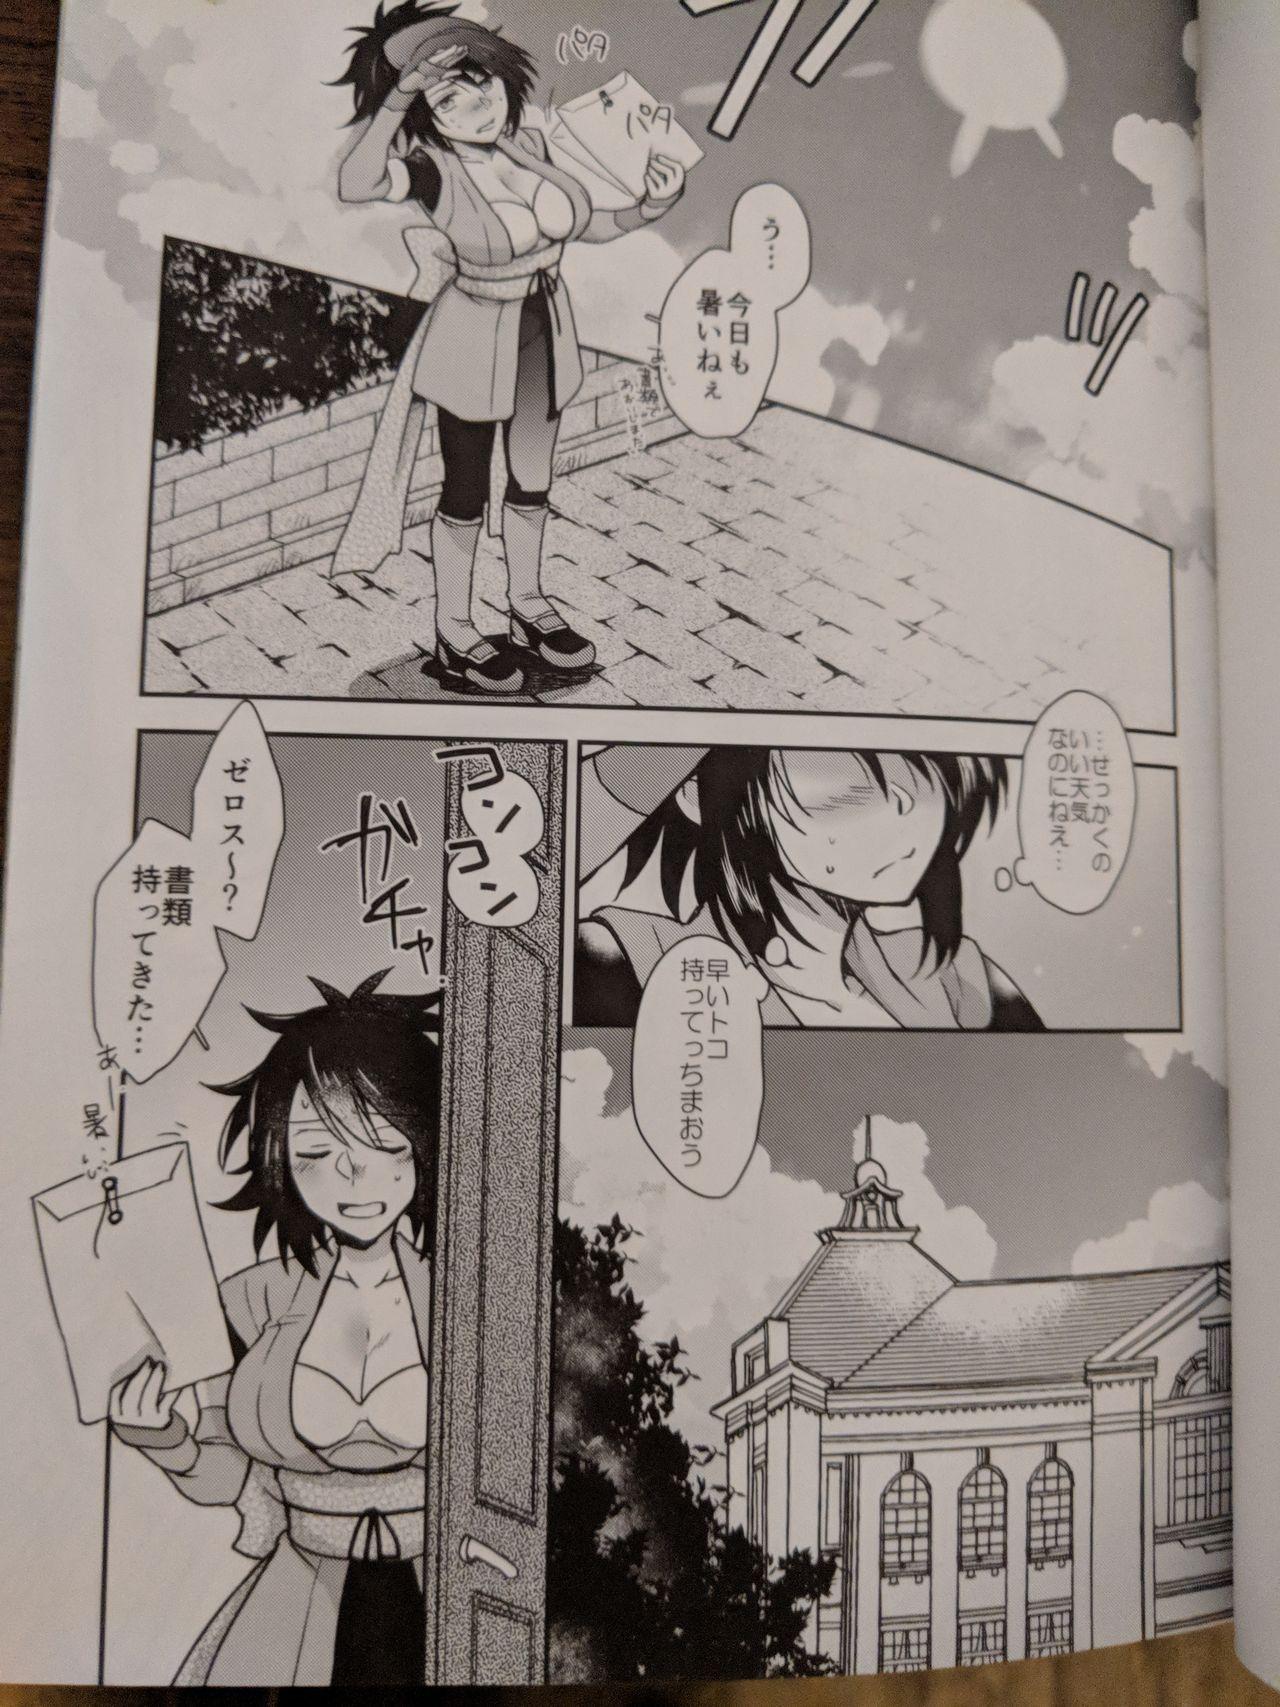 Load 彼女が水着にきがえたら - Tales of symphonia Behind - Page 2